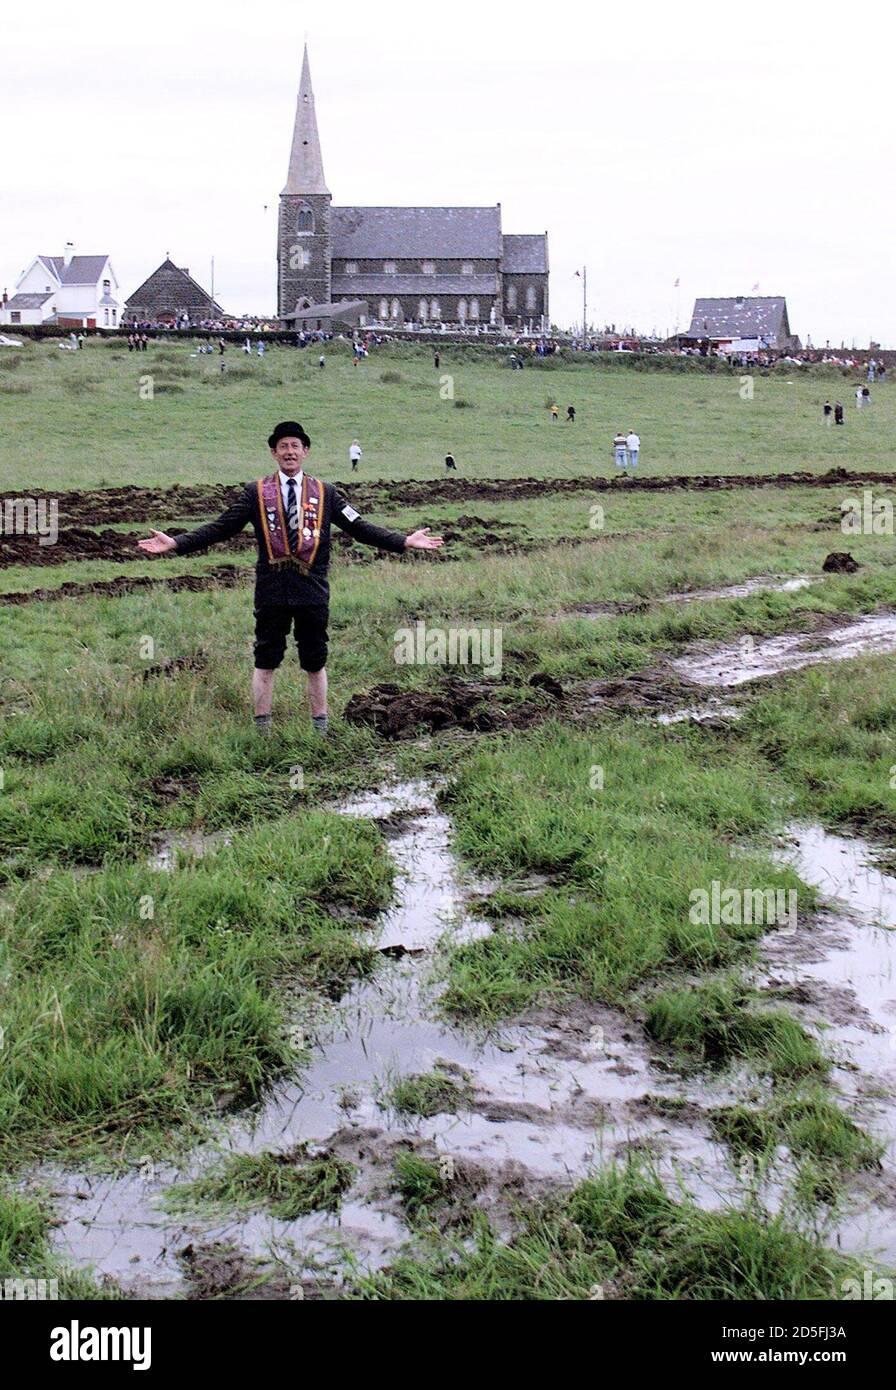 An Orangeman rolls up his trouser legs in the muddy field of Drumcree church in Portadown July 3. The Orange order march from the church down the Garvaghy road this year has been banned by the Parades Commission in Northern Ireland.  DC/kc Stock Photo